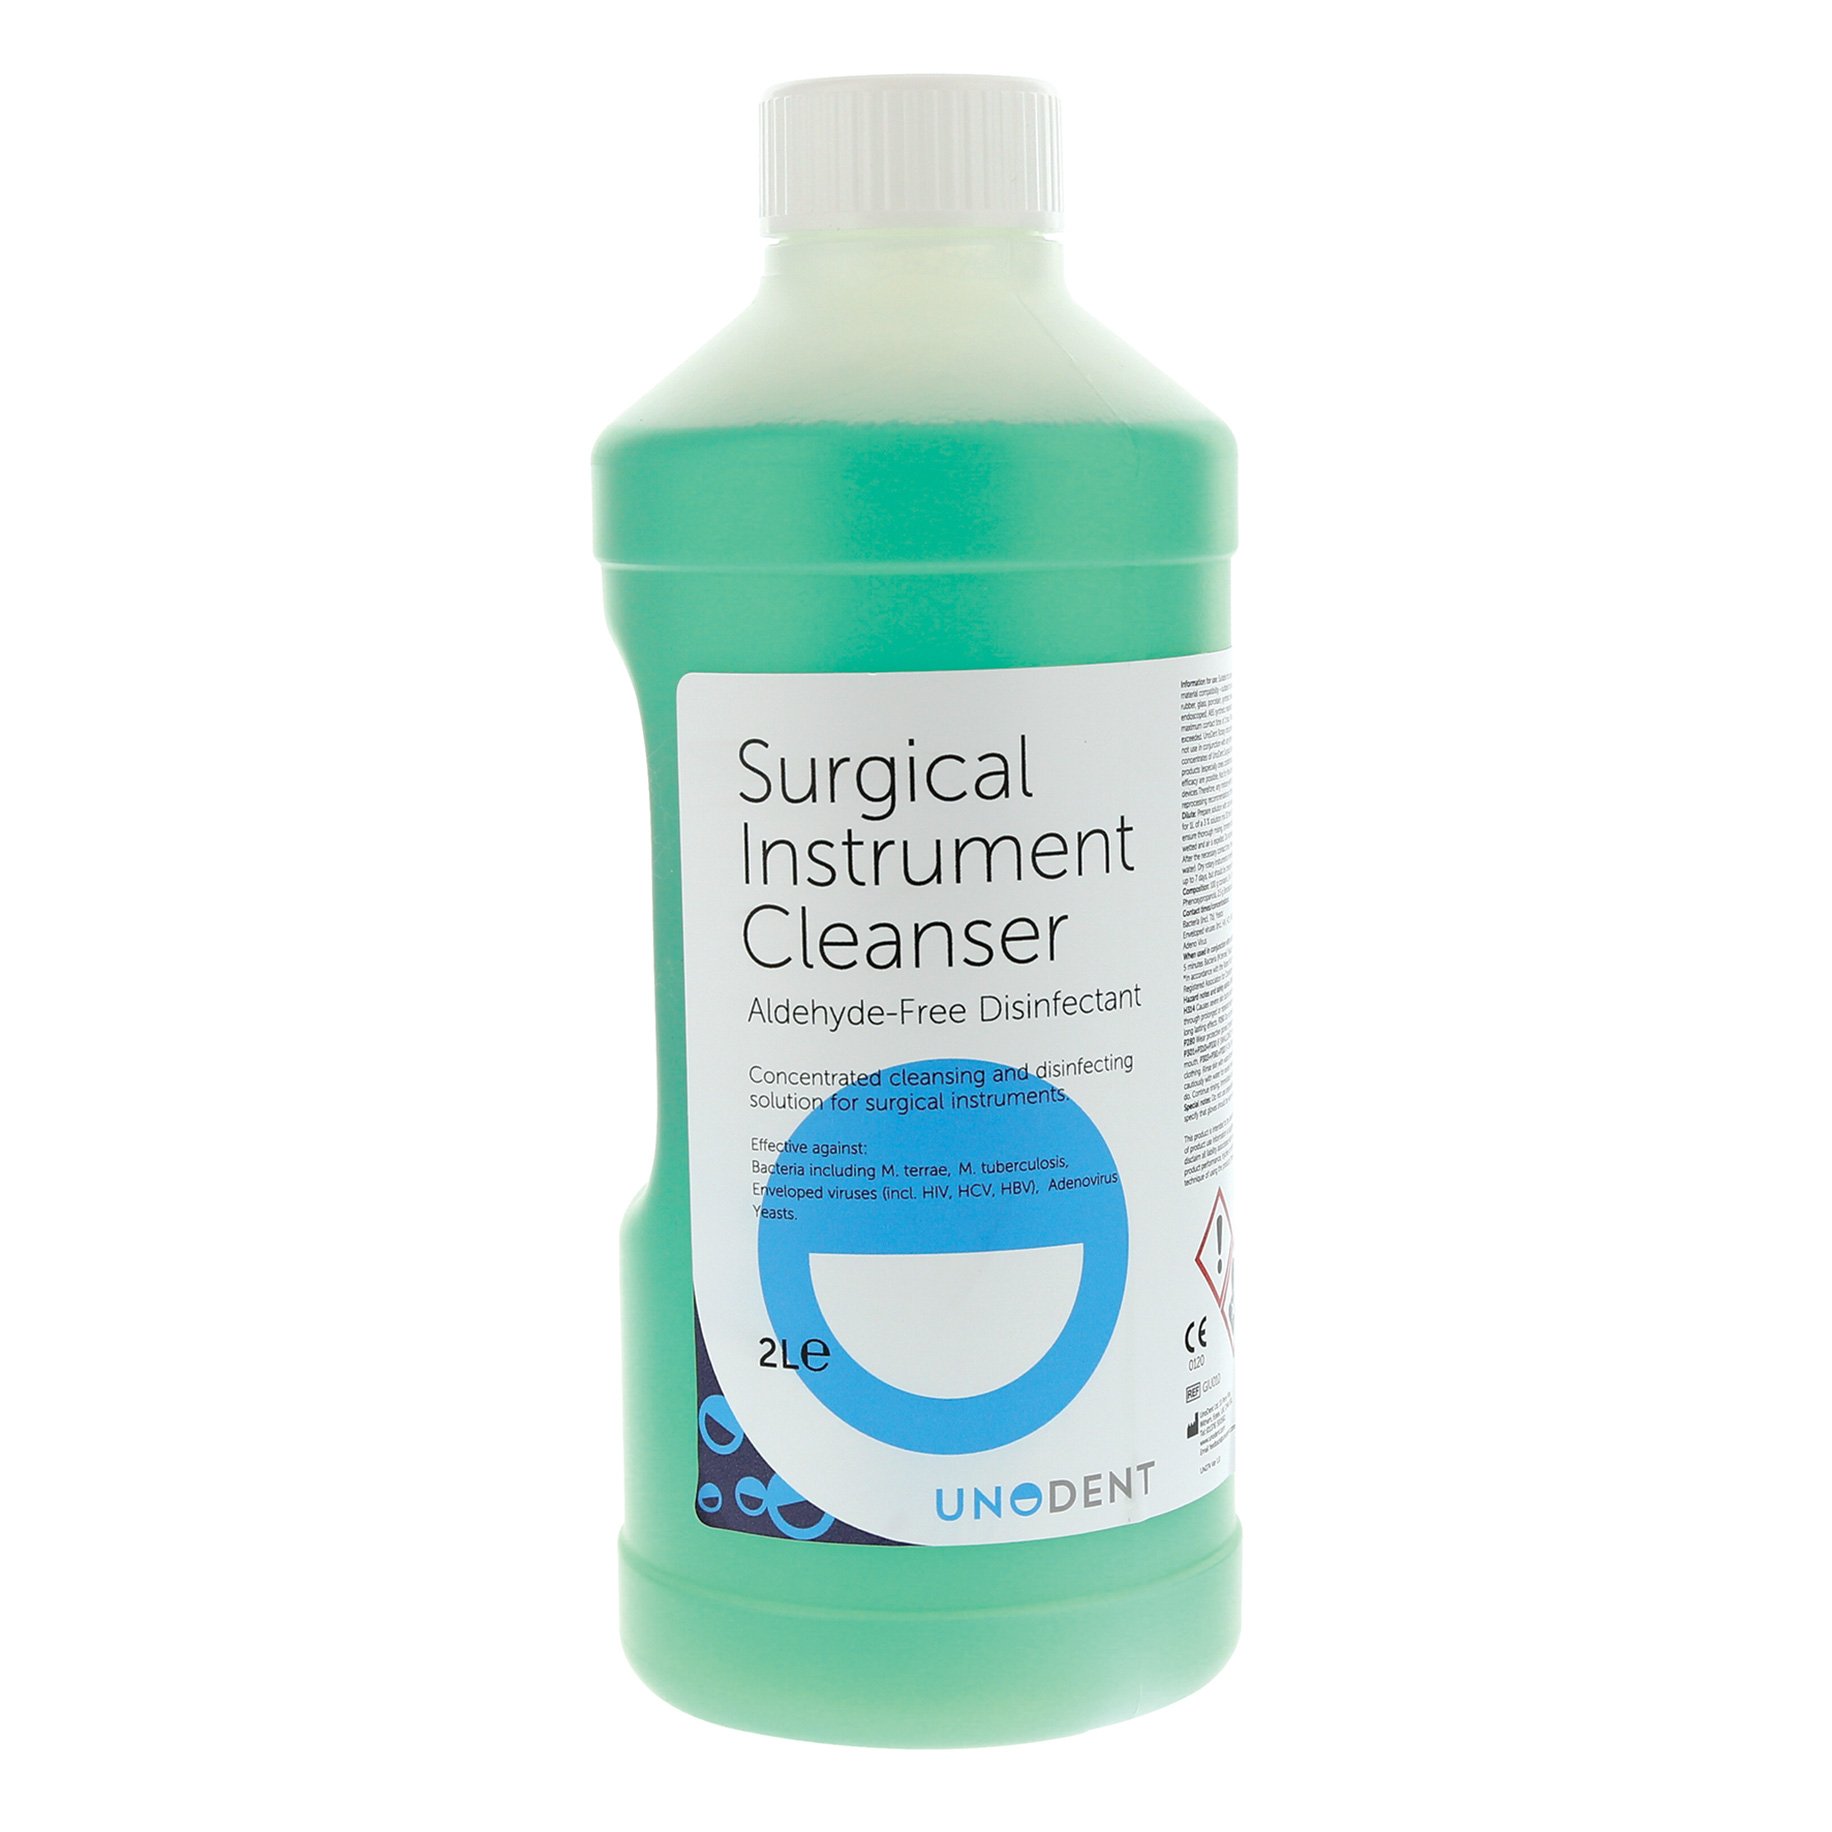 Surgical Instrument Cleanser/Disinfectant Concentrate 